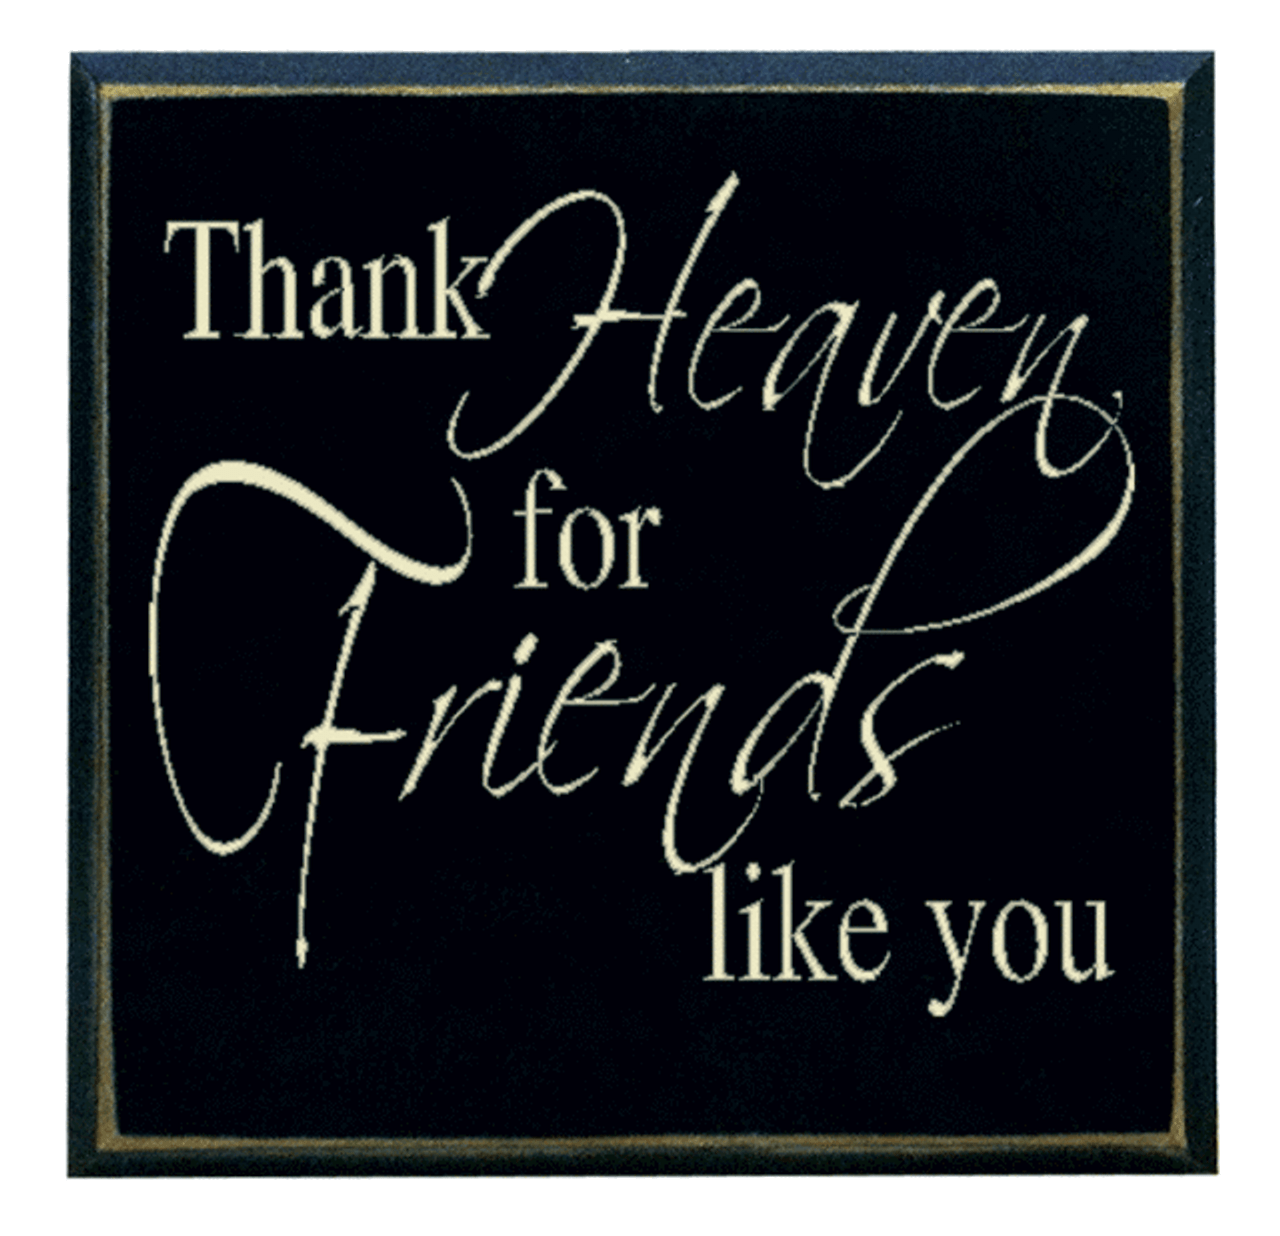 "Thank Heaven for Friends like you" 6 inch by 6 inch wood plaque